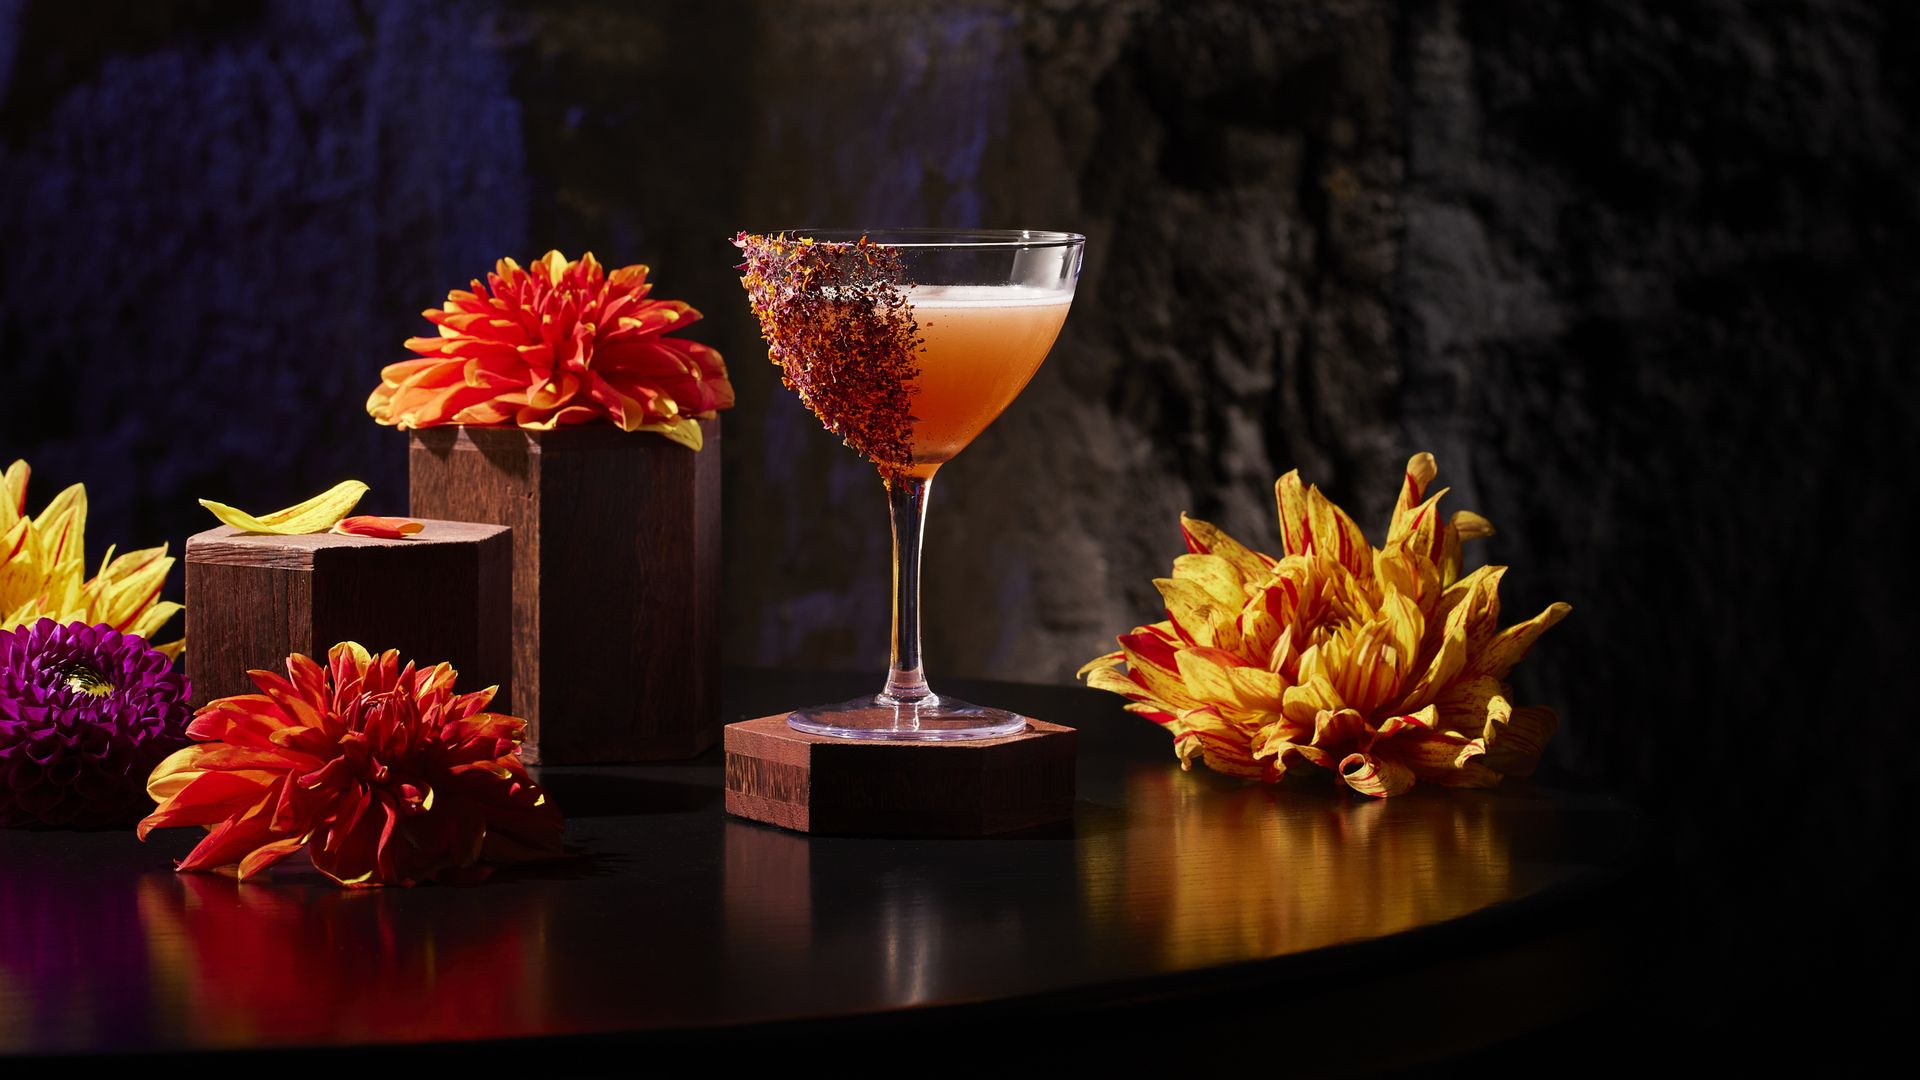 An orange cocktail with tajin on the side in a coup glass, next to colorful flowers.